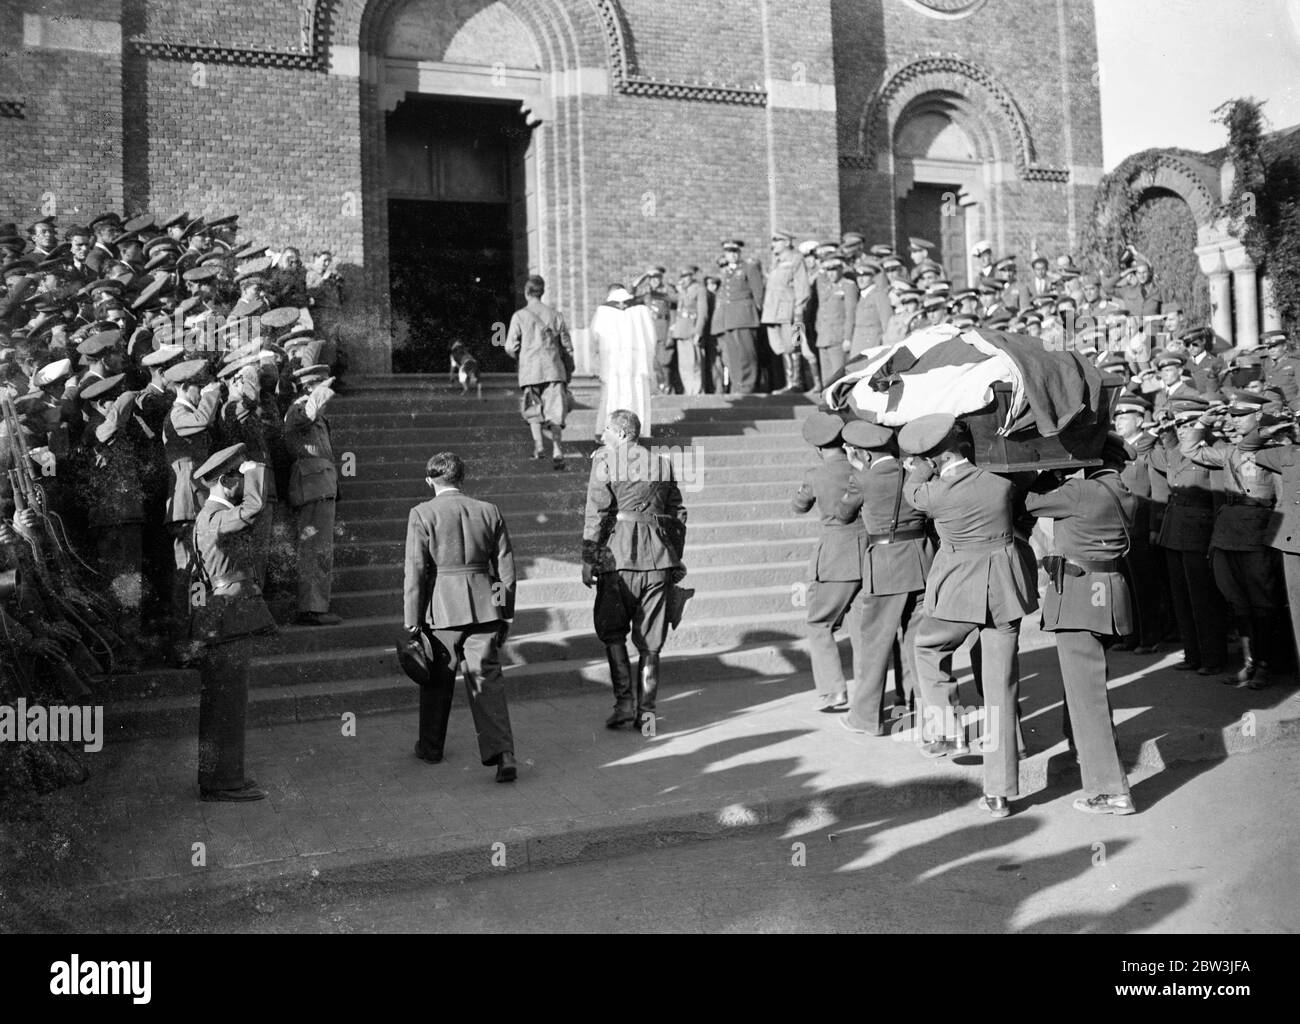 First airman killed in Abyssinian war given military funeral . The first airman killed in the Abyssinian war , Sergeant Birngo Dalmazio , a 24 year old flight sergeant and mechanic of the Italian forces who was wounded while on a bombing raid , was buried with full military honours in Asmara . Dalmazio , , who was hit by a dum dum bullet while flying with Lieutenant Sanze on a bombing raid on a decoy native camp in the valley between Enda Micael and Buja , was taken to hospital at Asmara but died from his wounds . Photo shows , the body of Sergeant Brirago Dalmazi being carried by comrades int Stock Photo